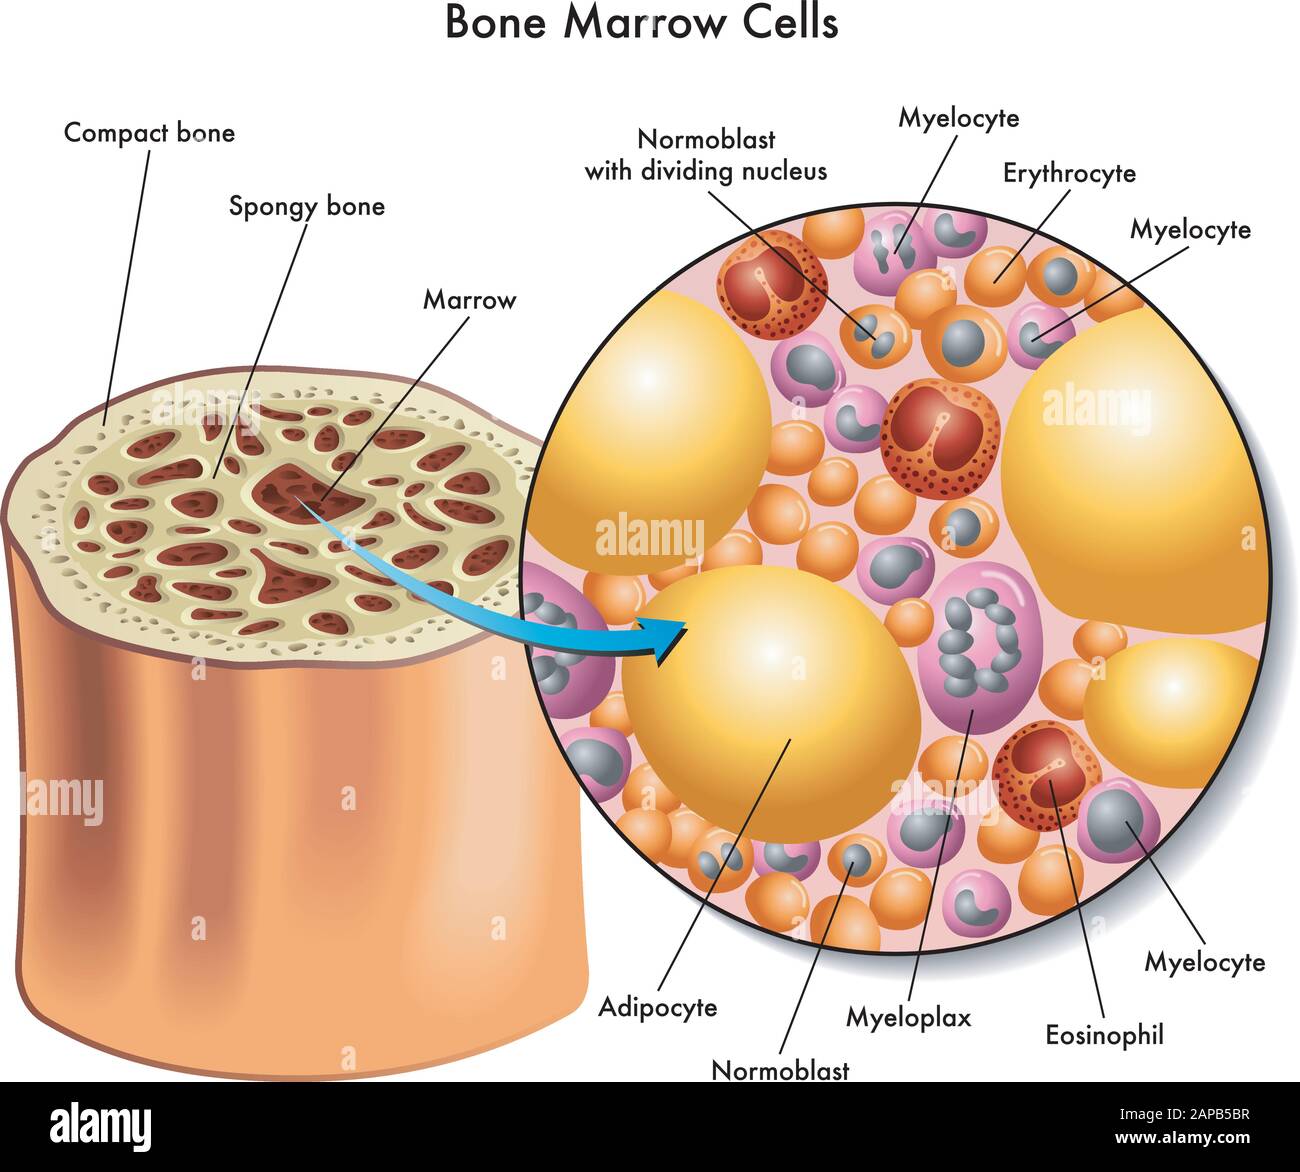 Medical illustration of the composition of bone marrow cells. Stock Vector